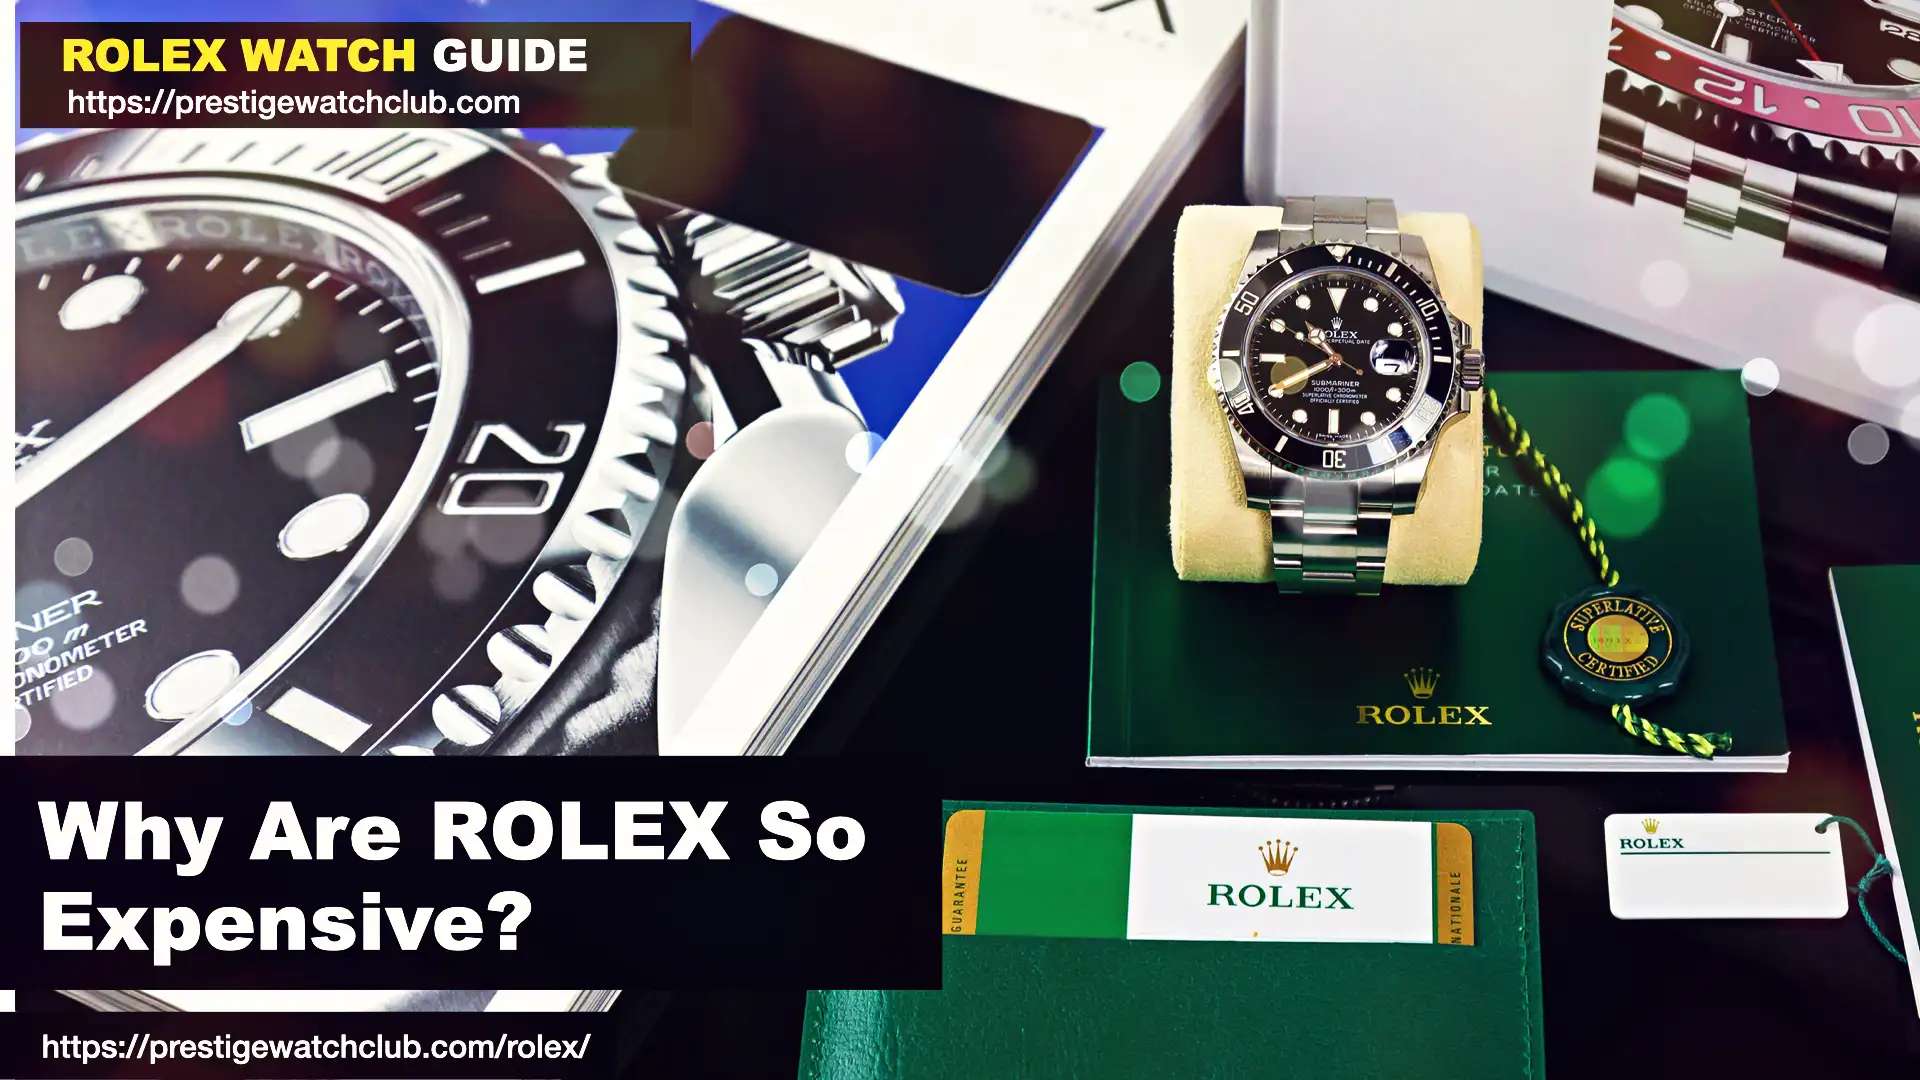 Why Are Rolex So Expensive?